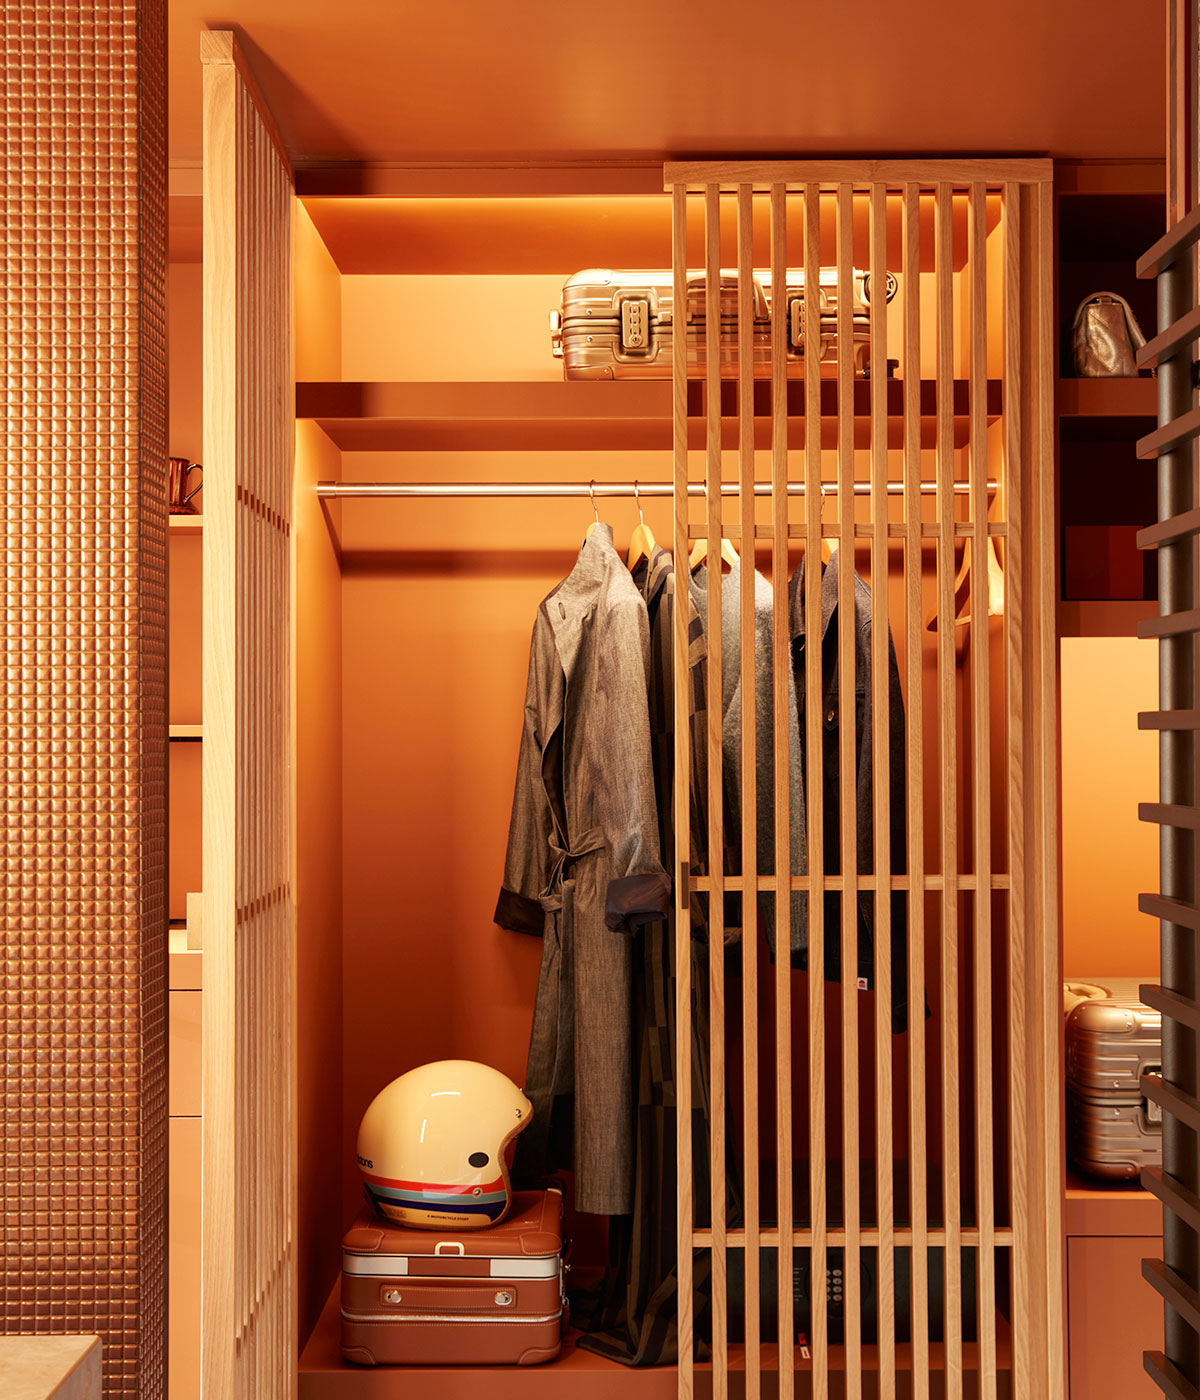 Wardrobe space with hangers and place for luggage.